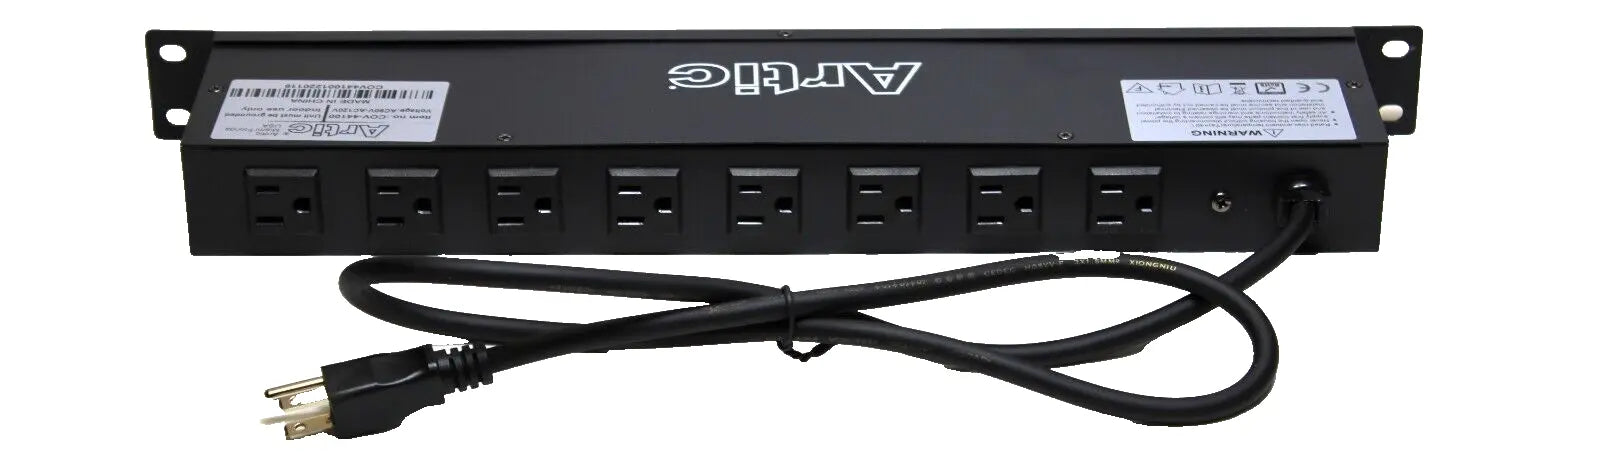 8 Outlet Metal Power Strip with Individual Switches, Heavy Duty